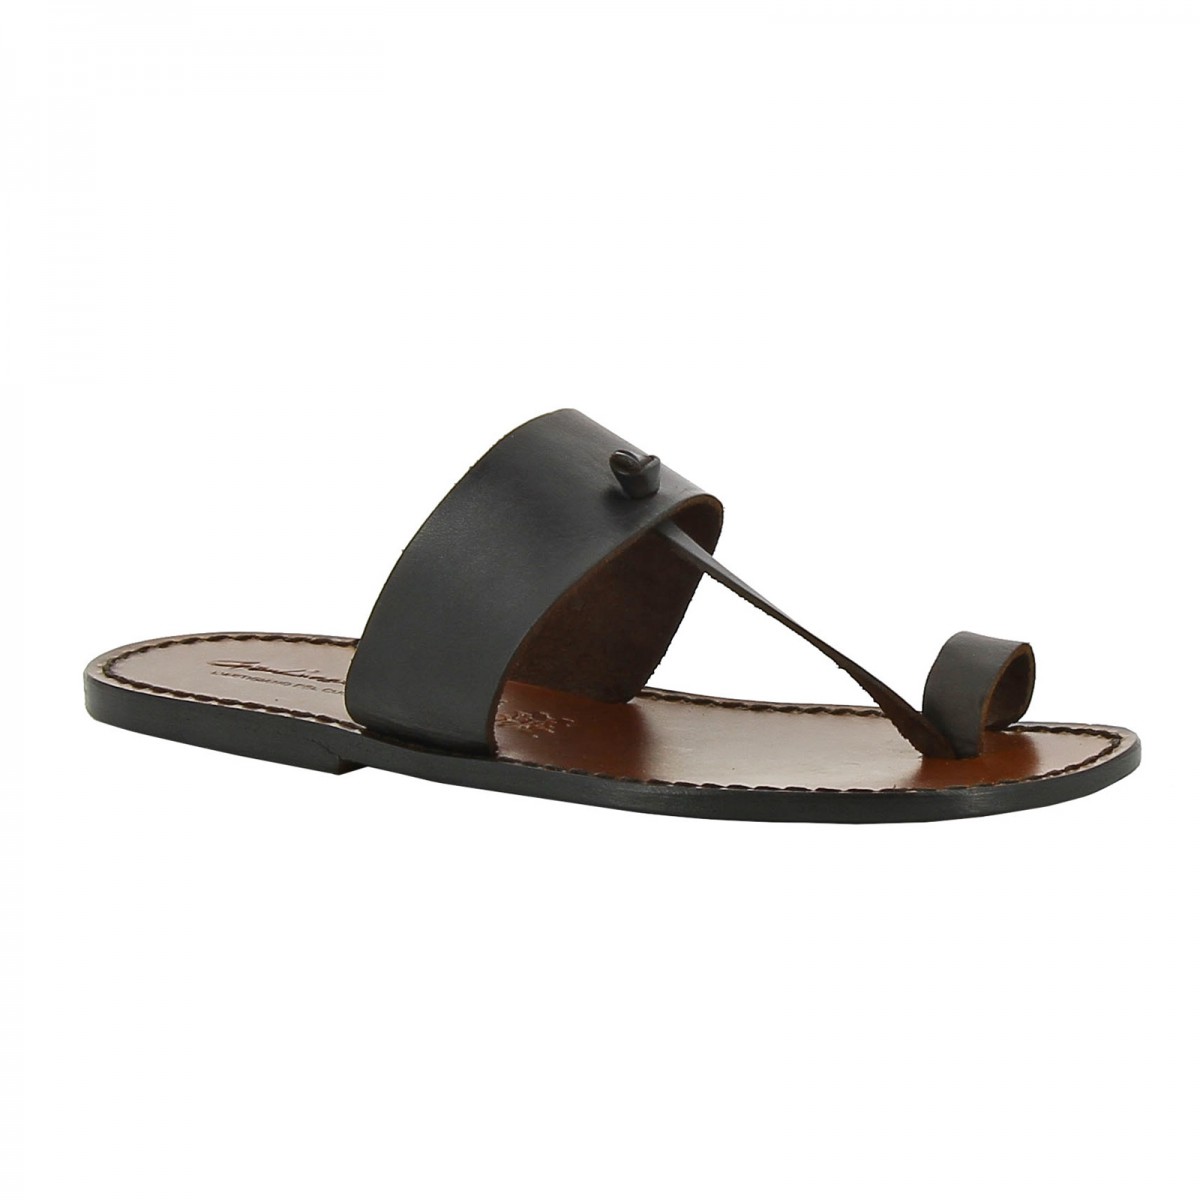 Dark Brown leather thong sandals Handmade in Italy | The leather craftsmen